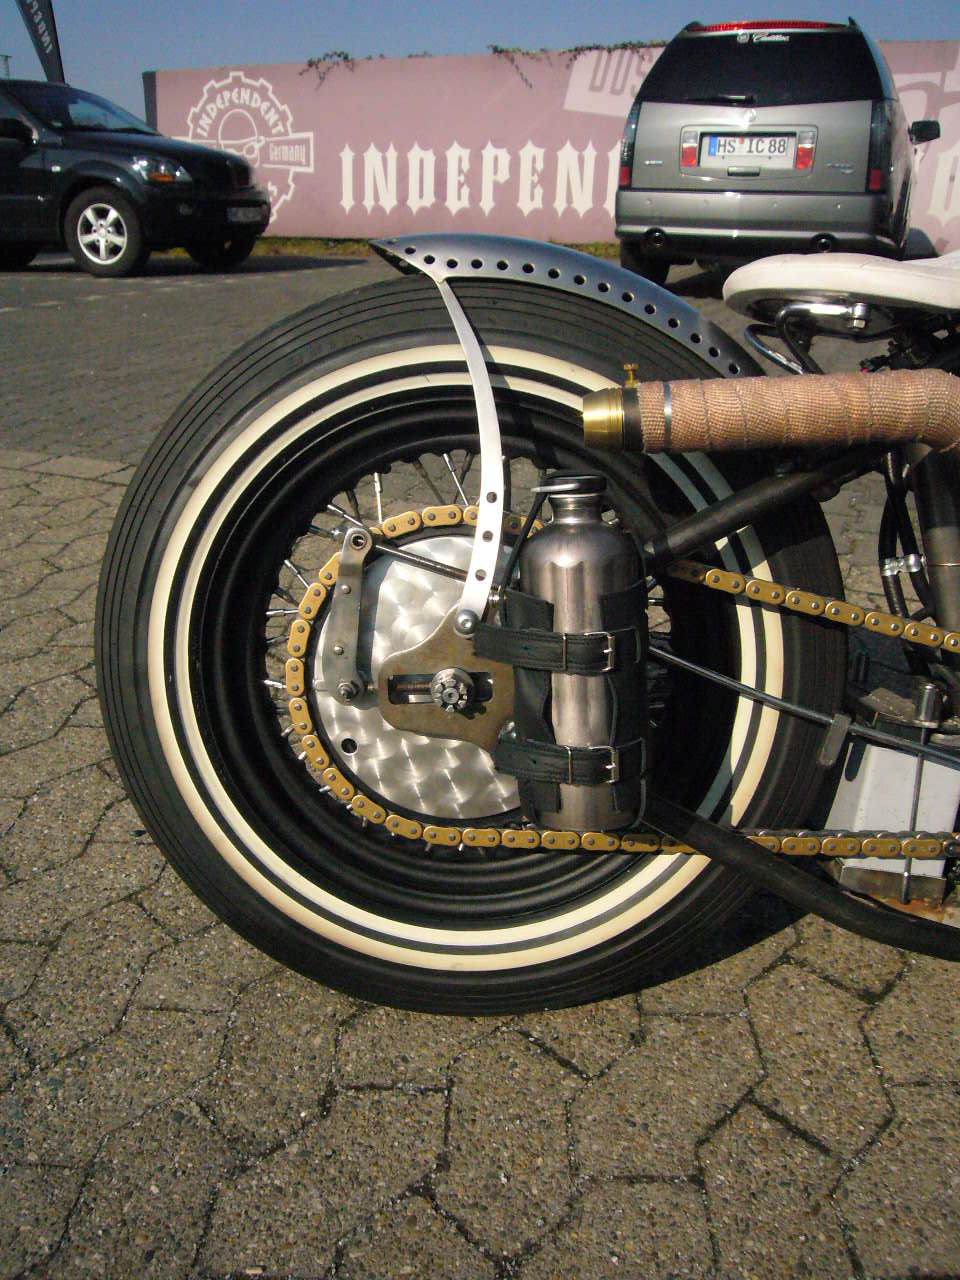 INDEPENDENT CHOPPERS: New Part - Old School Benzinflasche